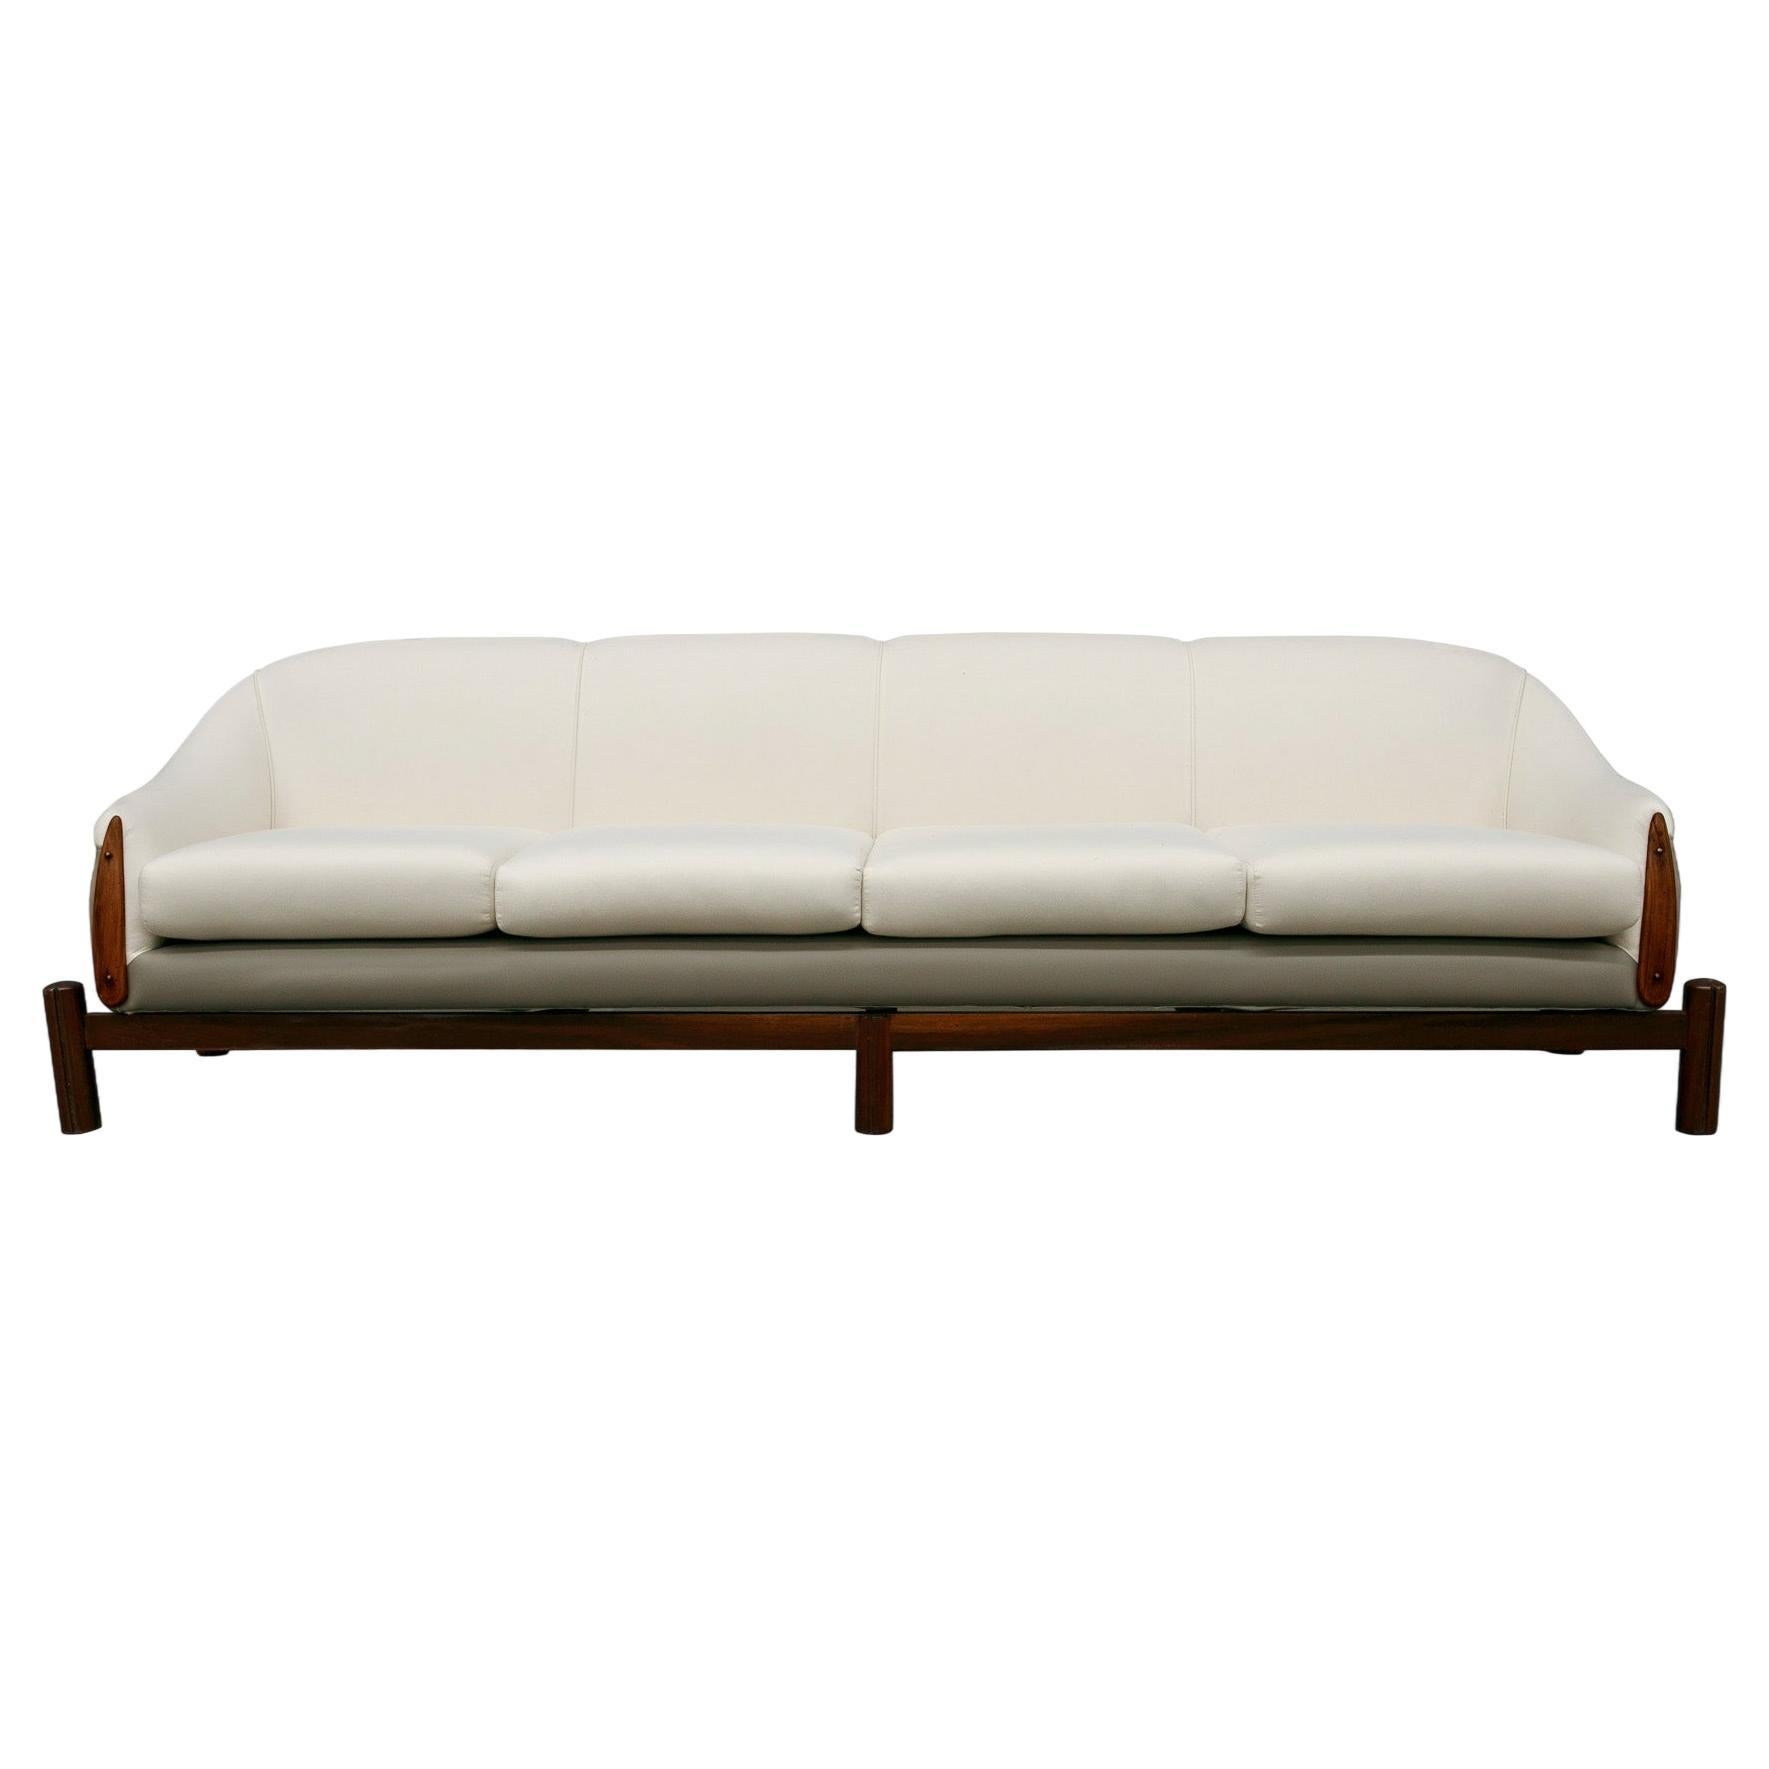 Brazilian Modern Sofa in Hardwood, Grey Leather & White Fabric by Cimo, 1960s For Sale